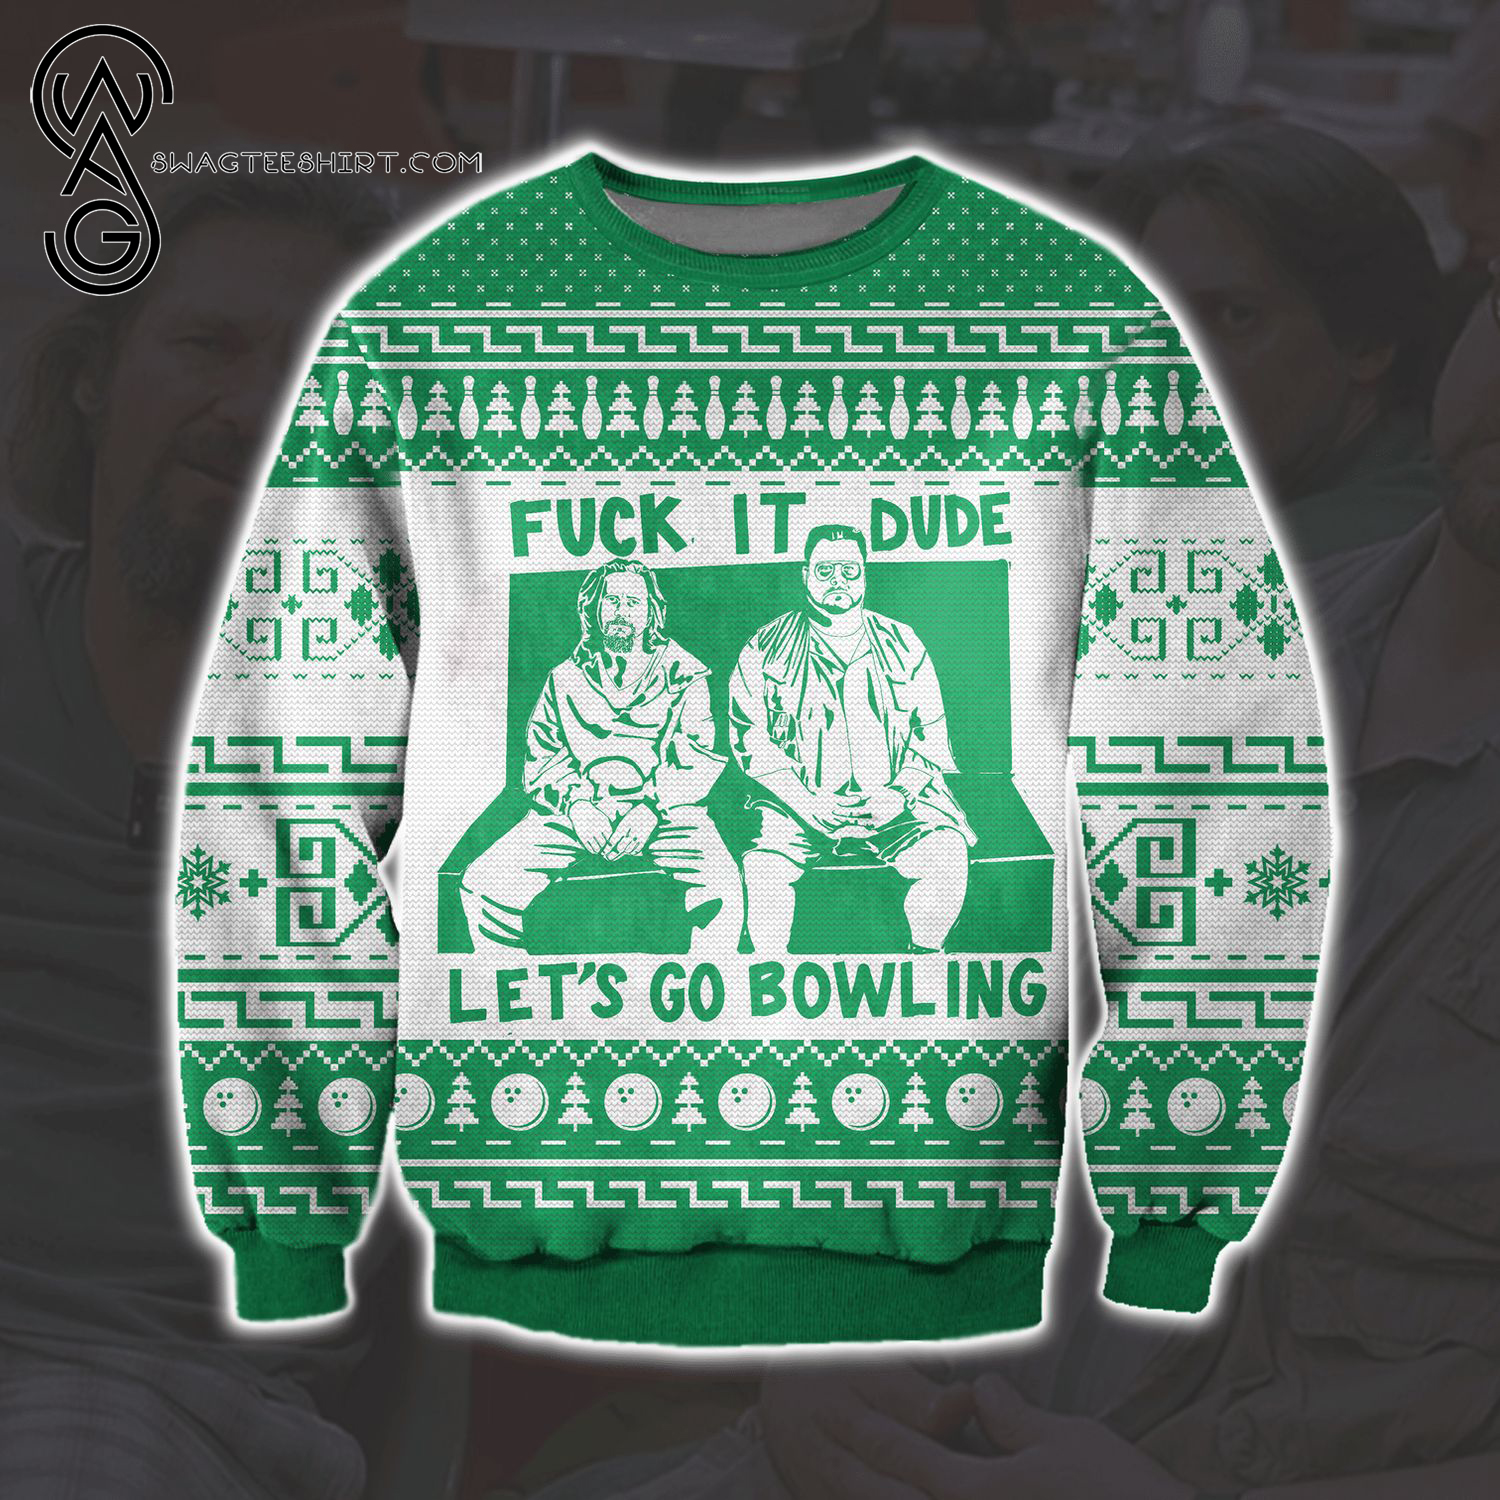 The Big Lebowski Fuck It Dude Let's Go Bowling Ugly Christmas Sweater